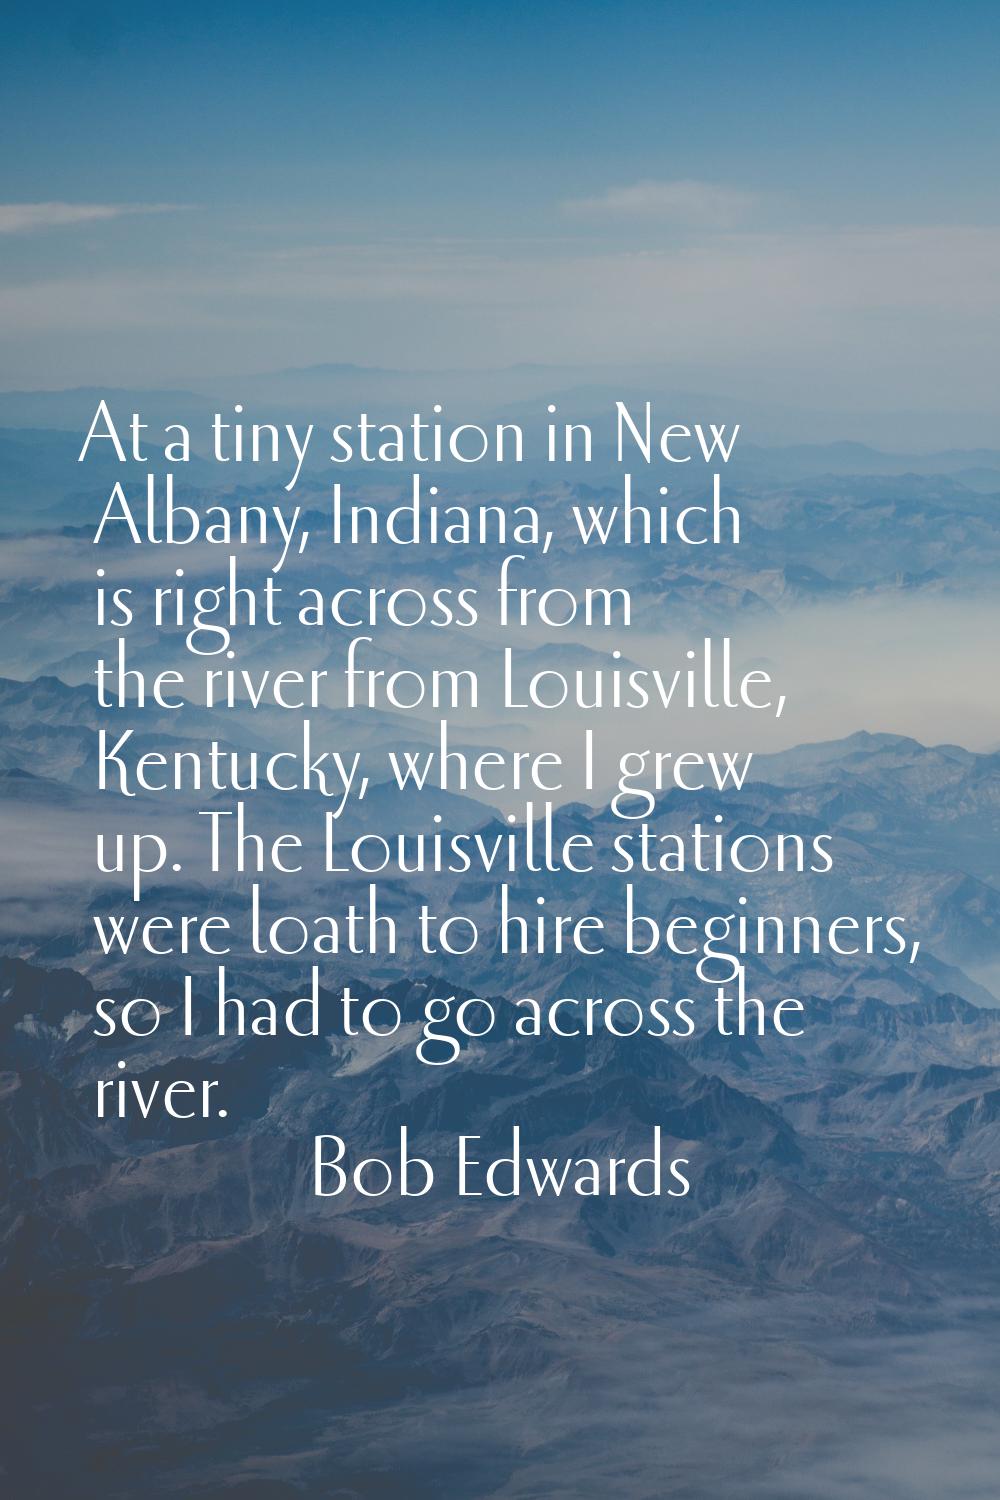 At a tiny station in New Albany, Indiana, which is right across from the river from Louisville, Ken